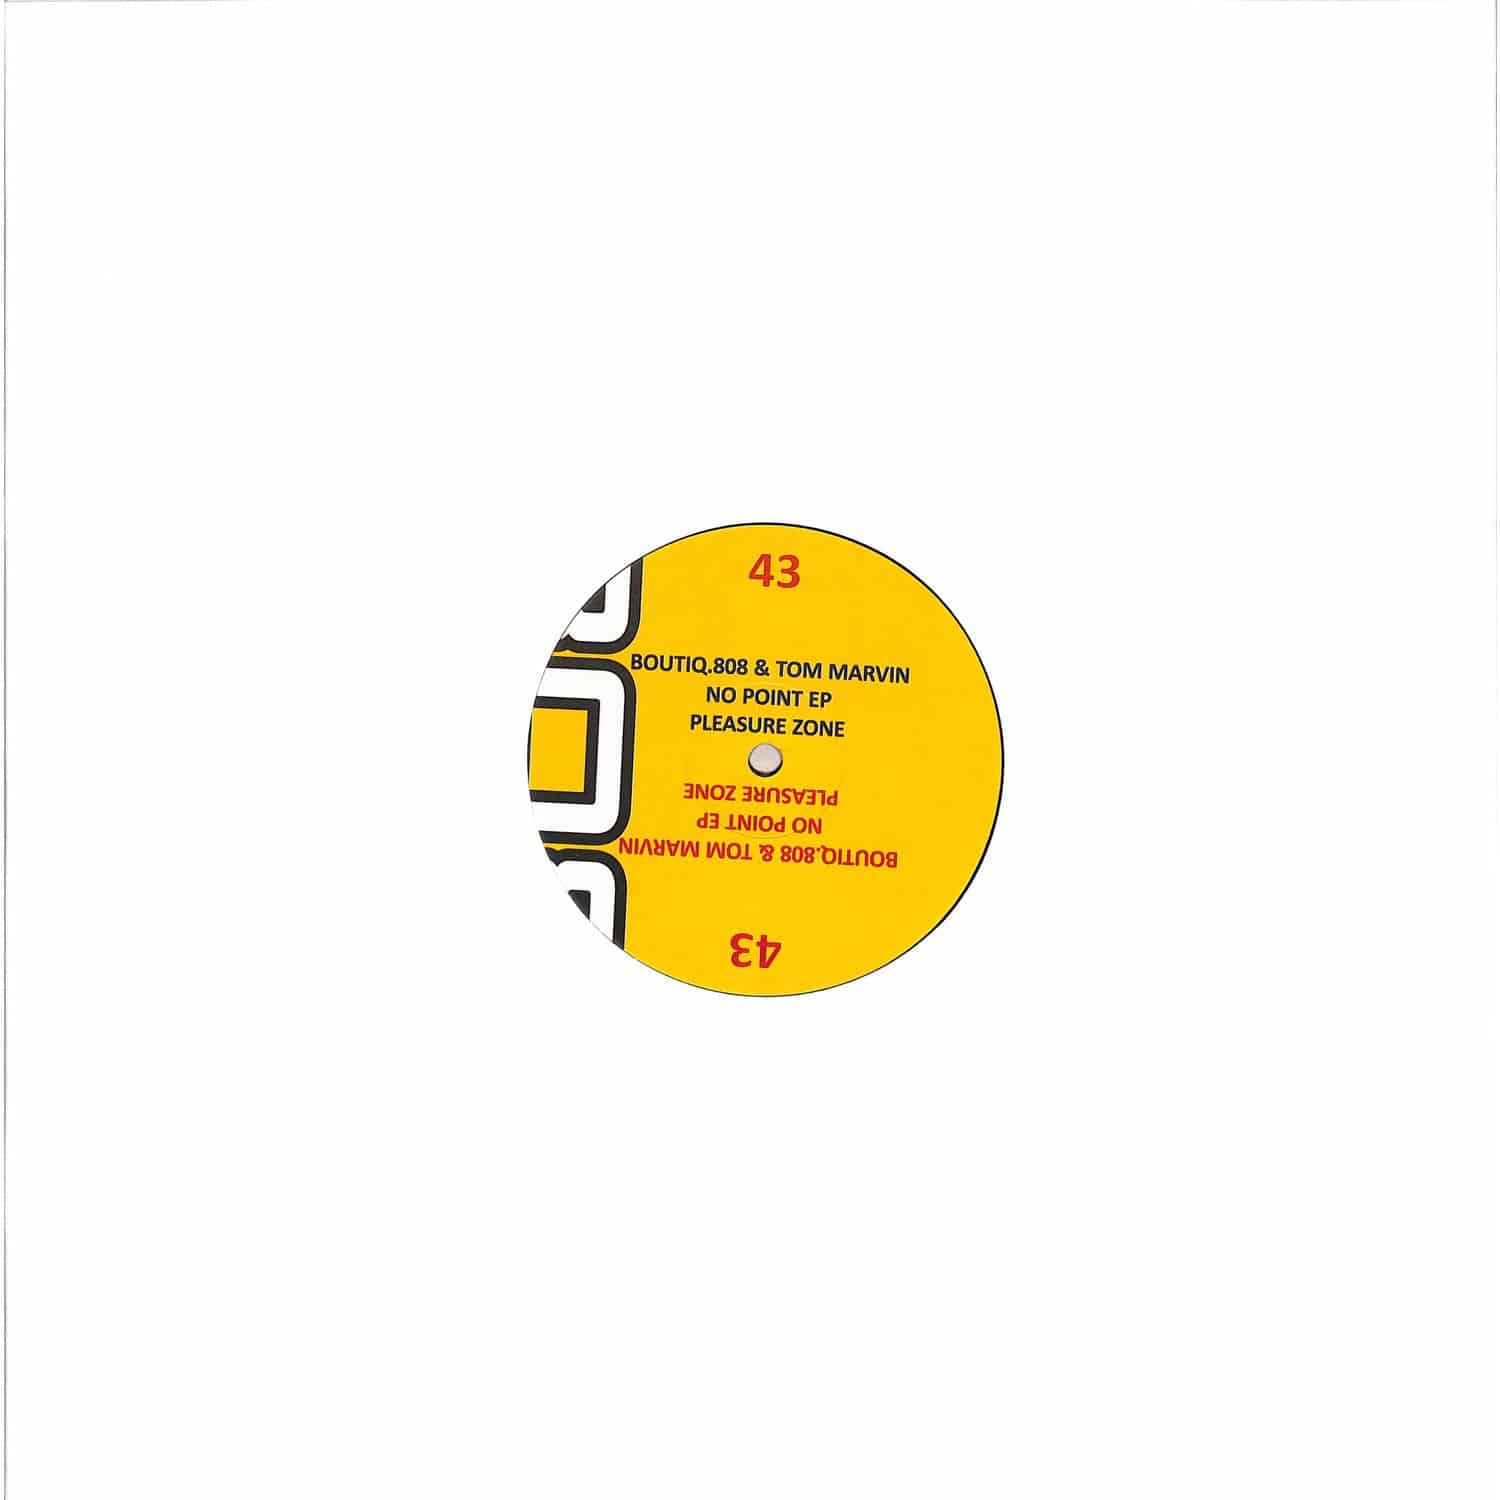 Boutiq.808 & Tom Marvin - NO POINT EP